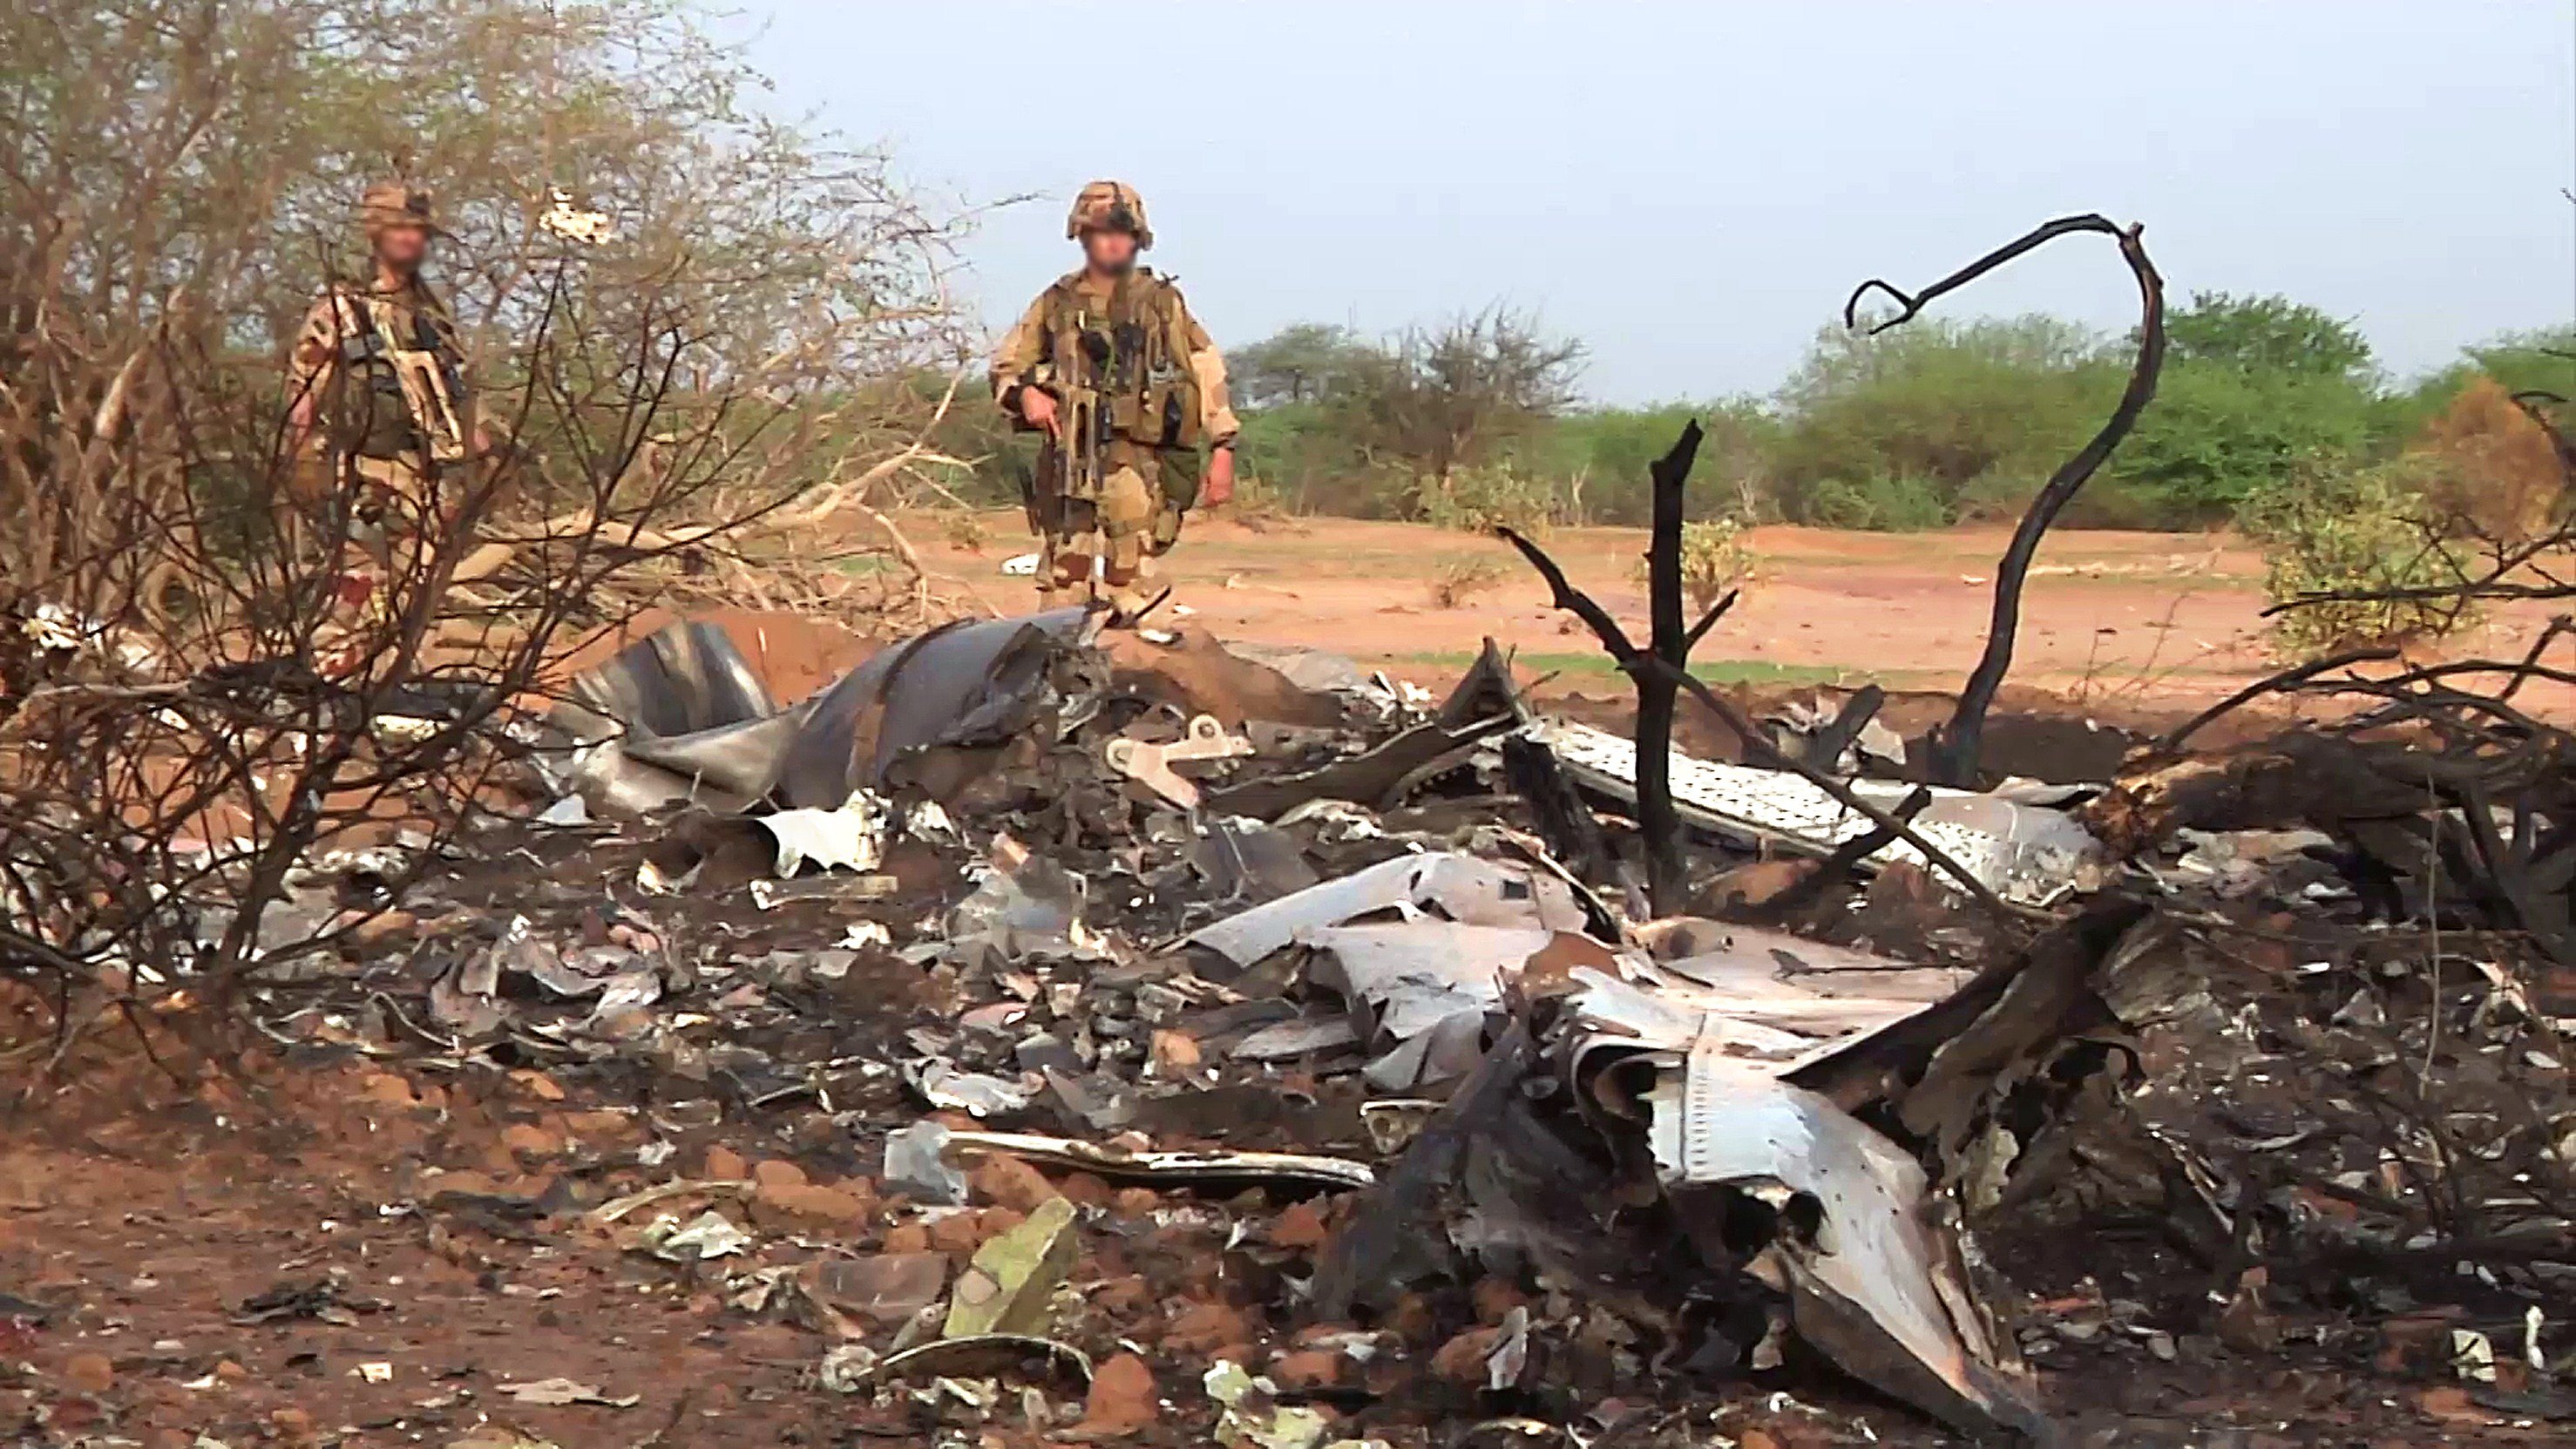 French soldiers stand by the wreckage of the Air Algerie flight AH5017 which crashed in Mali's Gossi region, west of Gao, on July 24, 2014. (AFP/Getty Images)